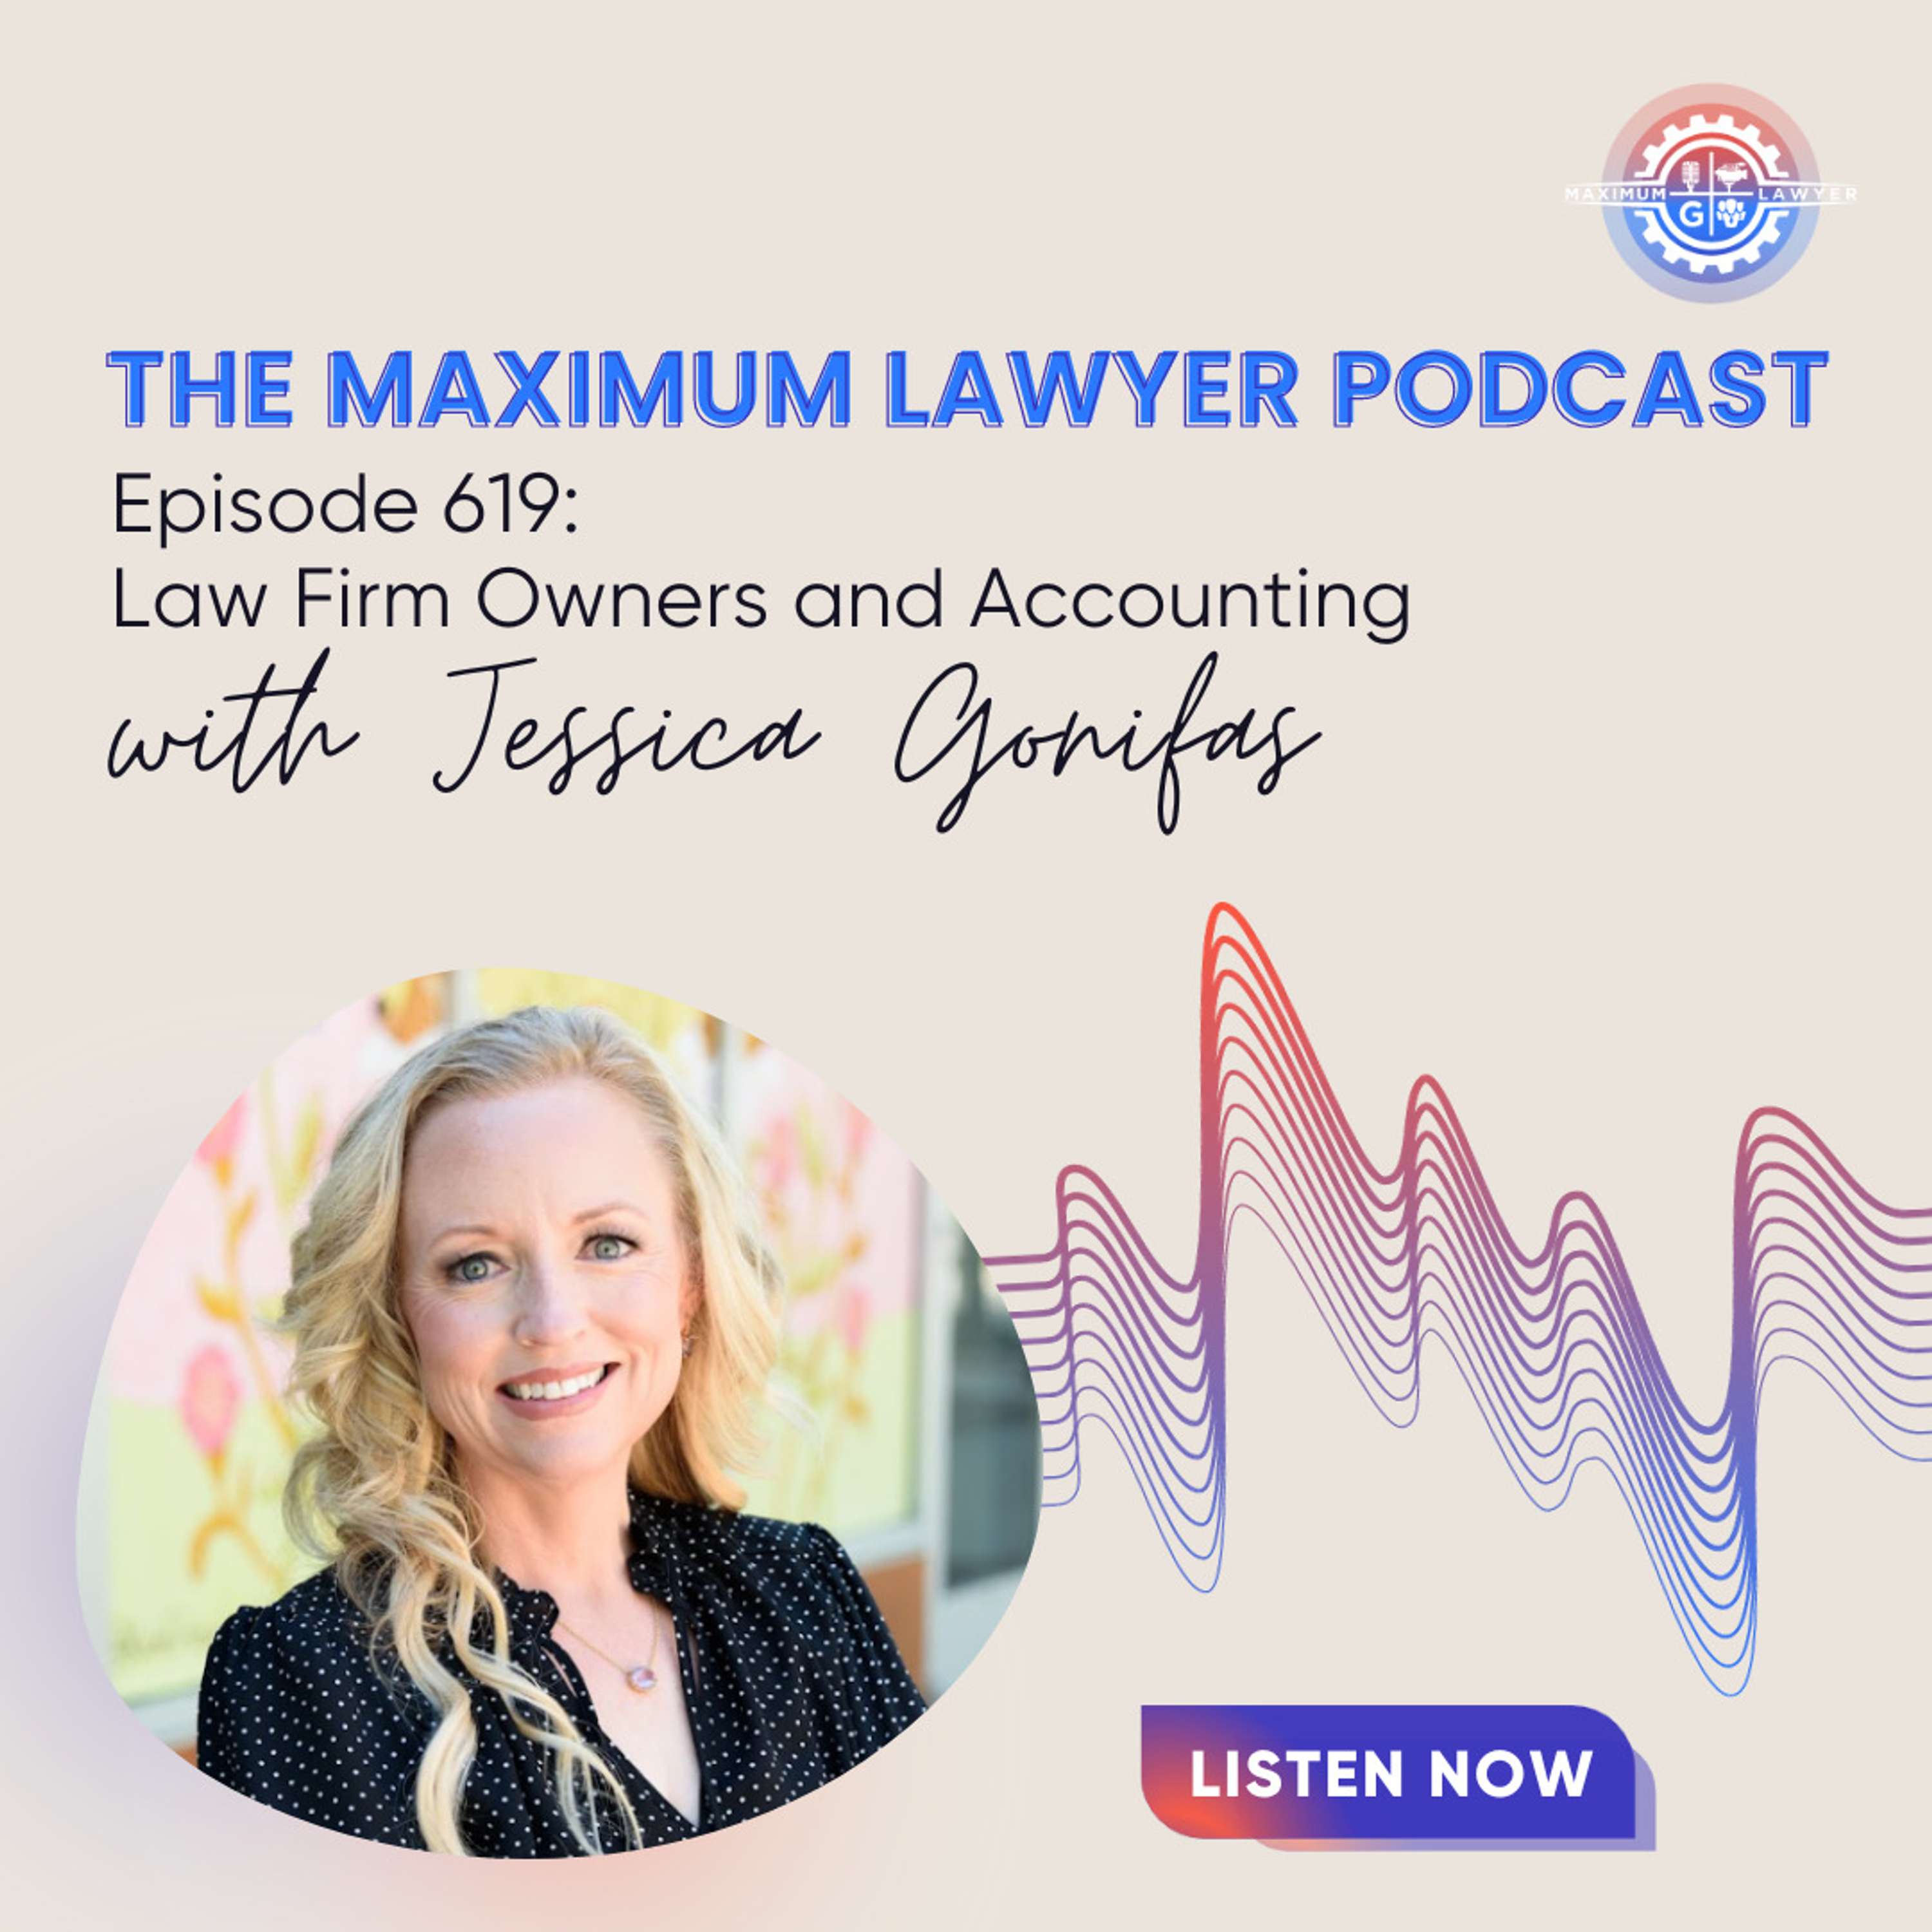 Law Firm Owners and Accounting with Jessica Gonifas